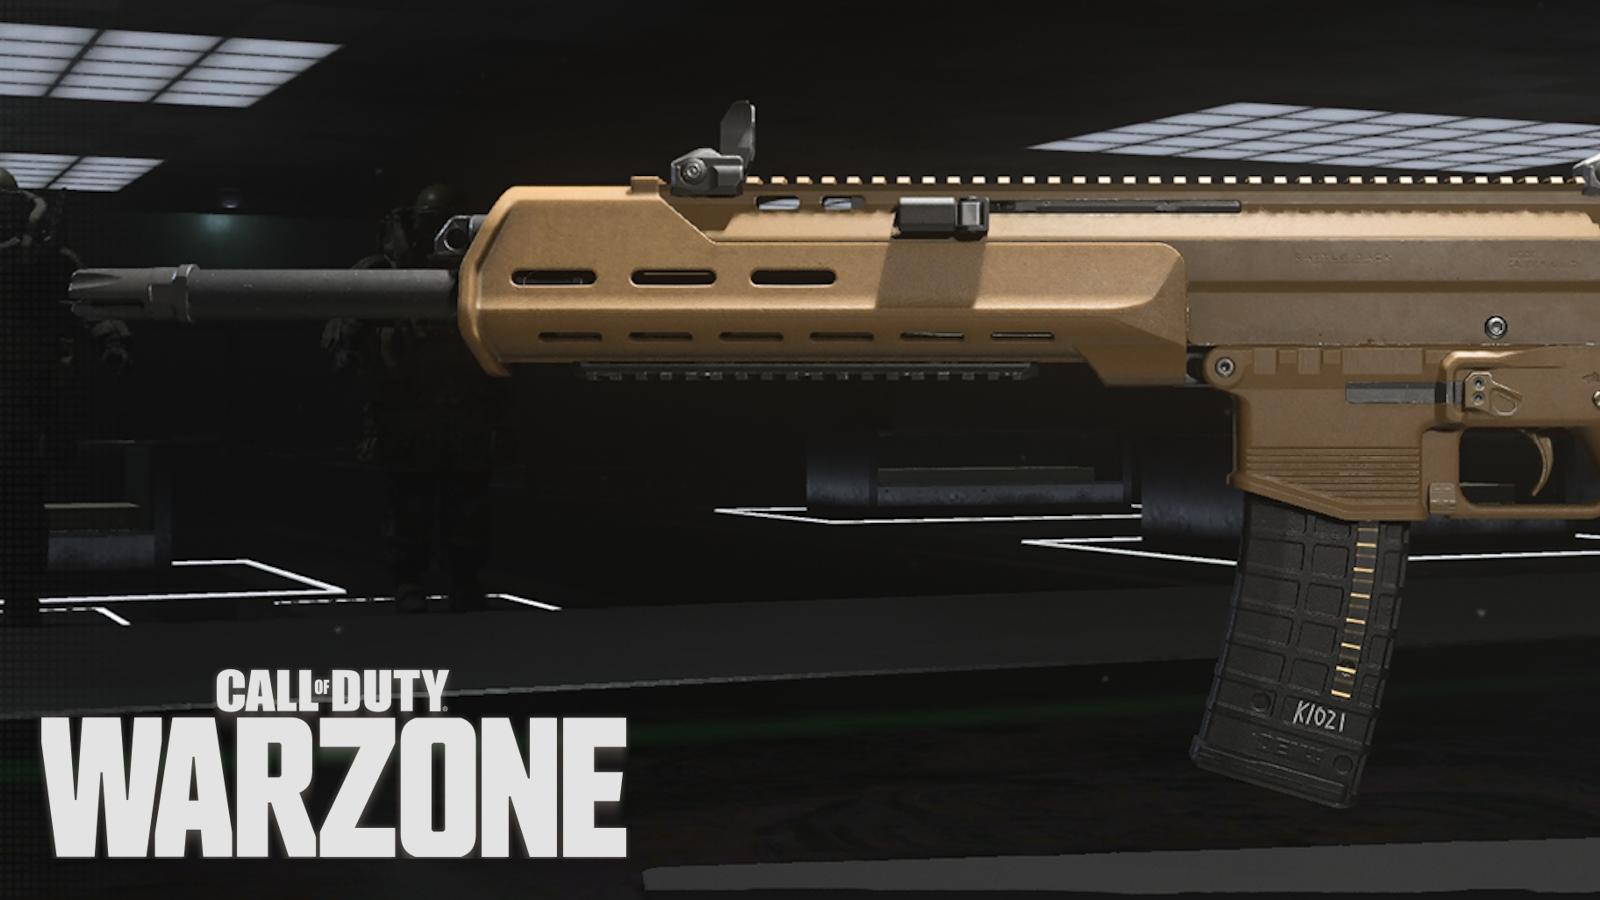 MCW assault rifle with Call of Duty: Warzone logo.